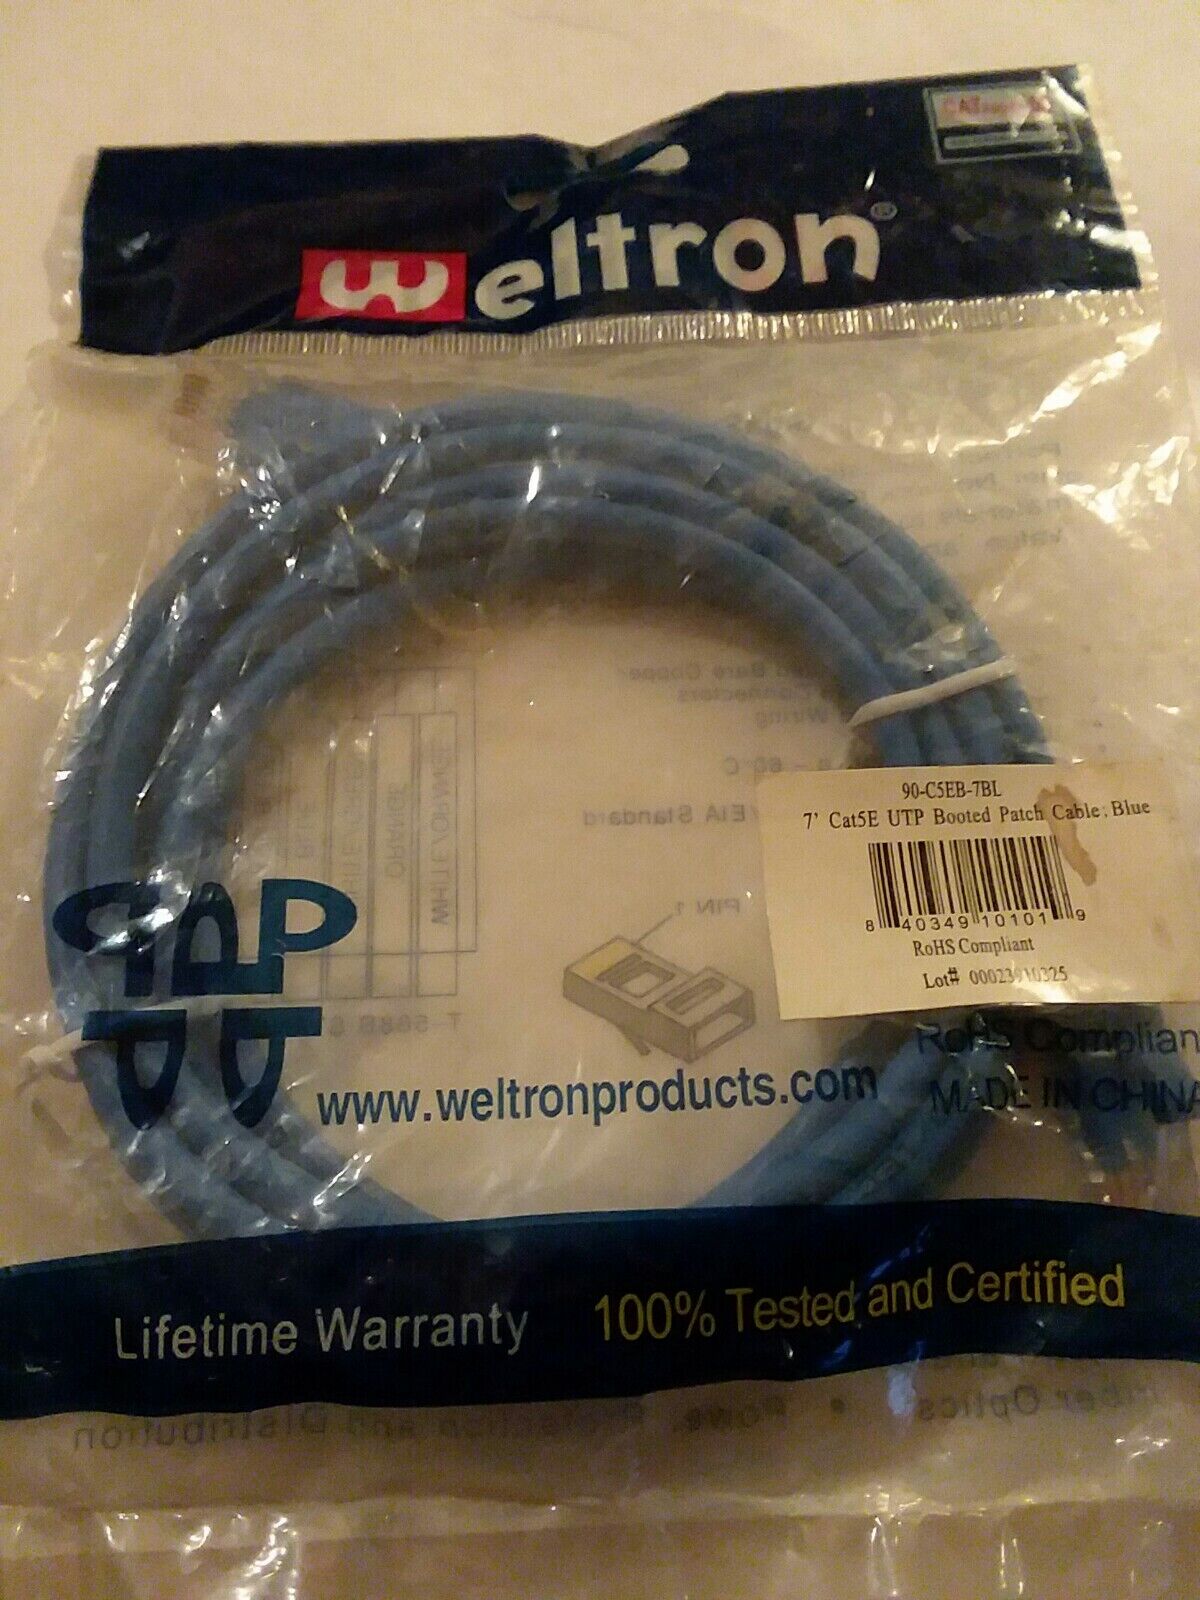 Weltron 90-C5EB-7BL Patch Cable